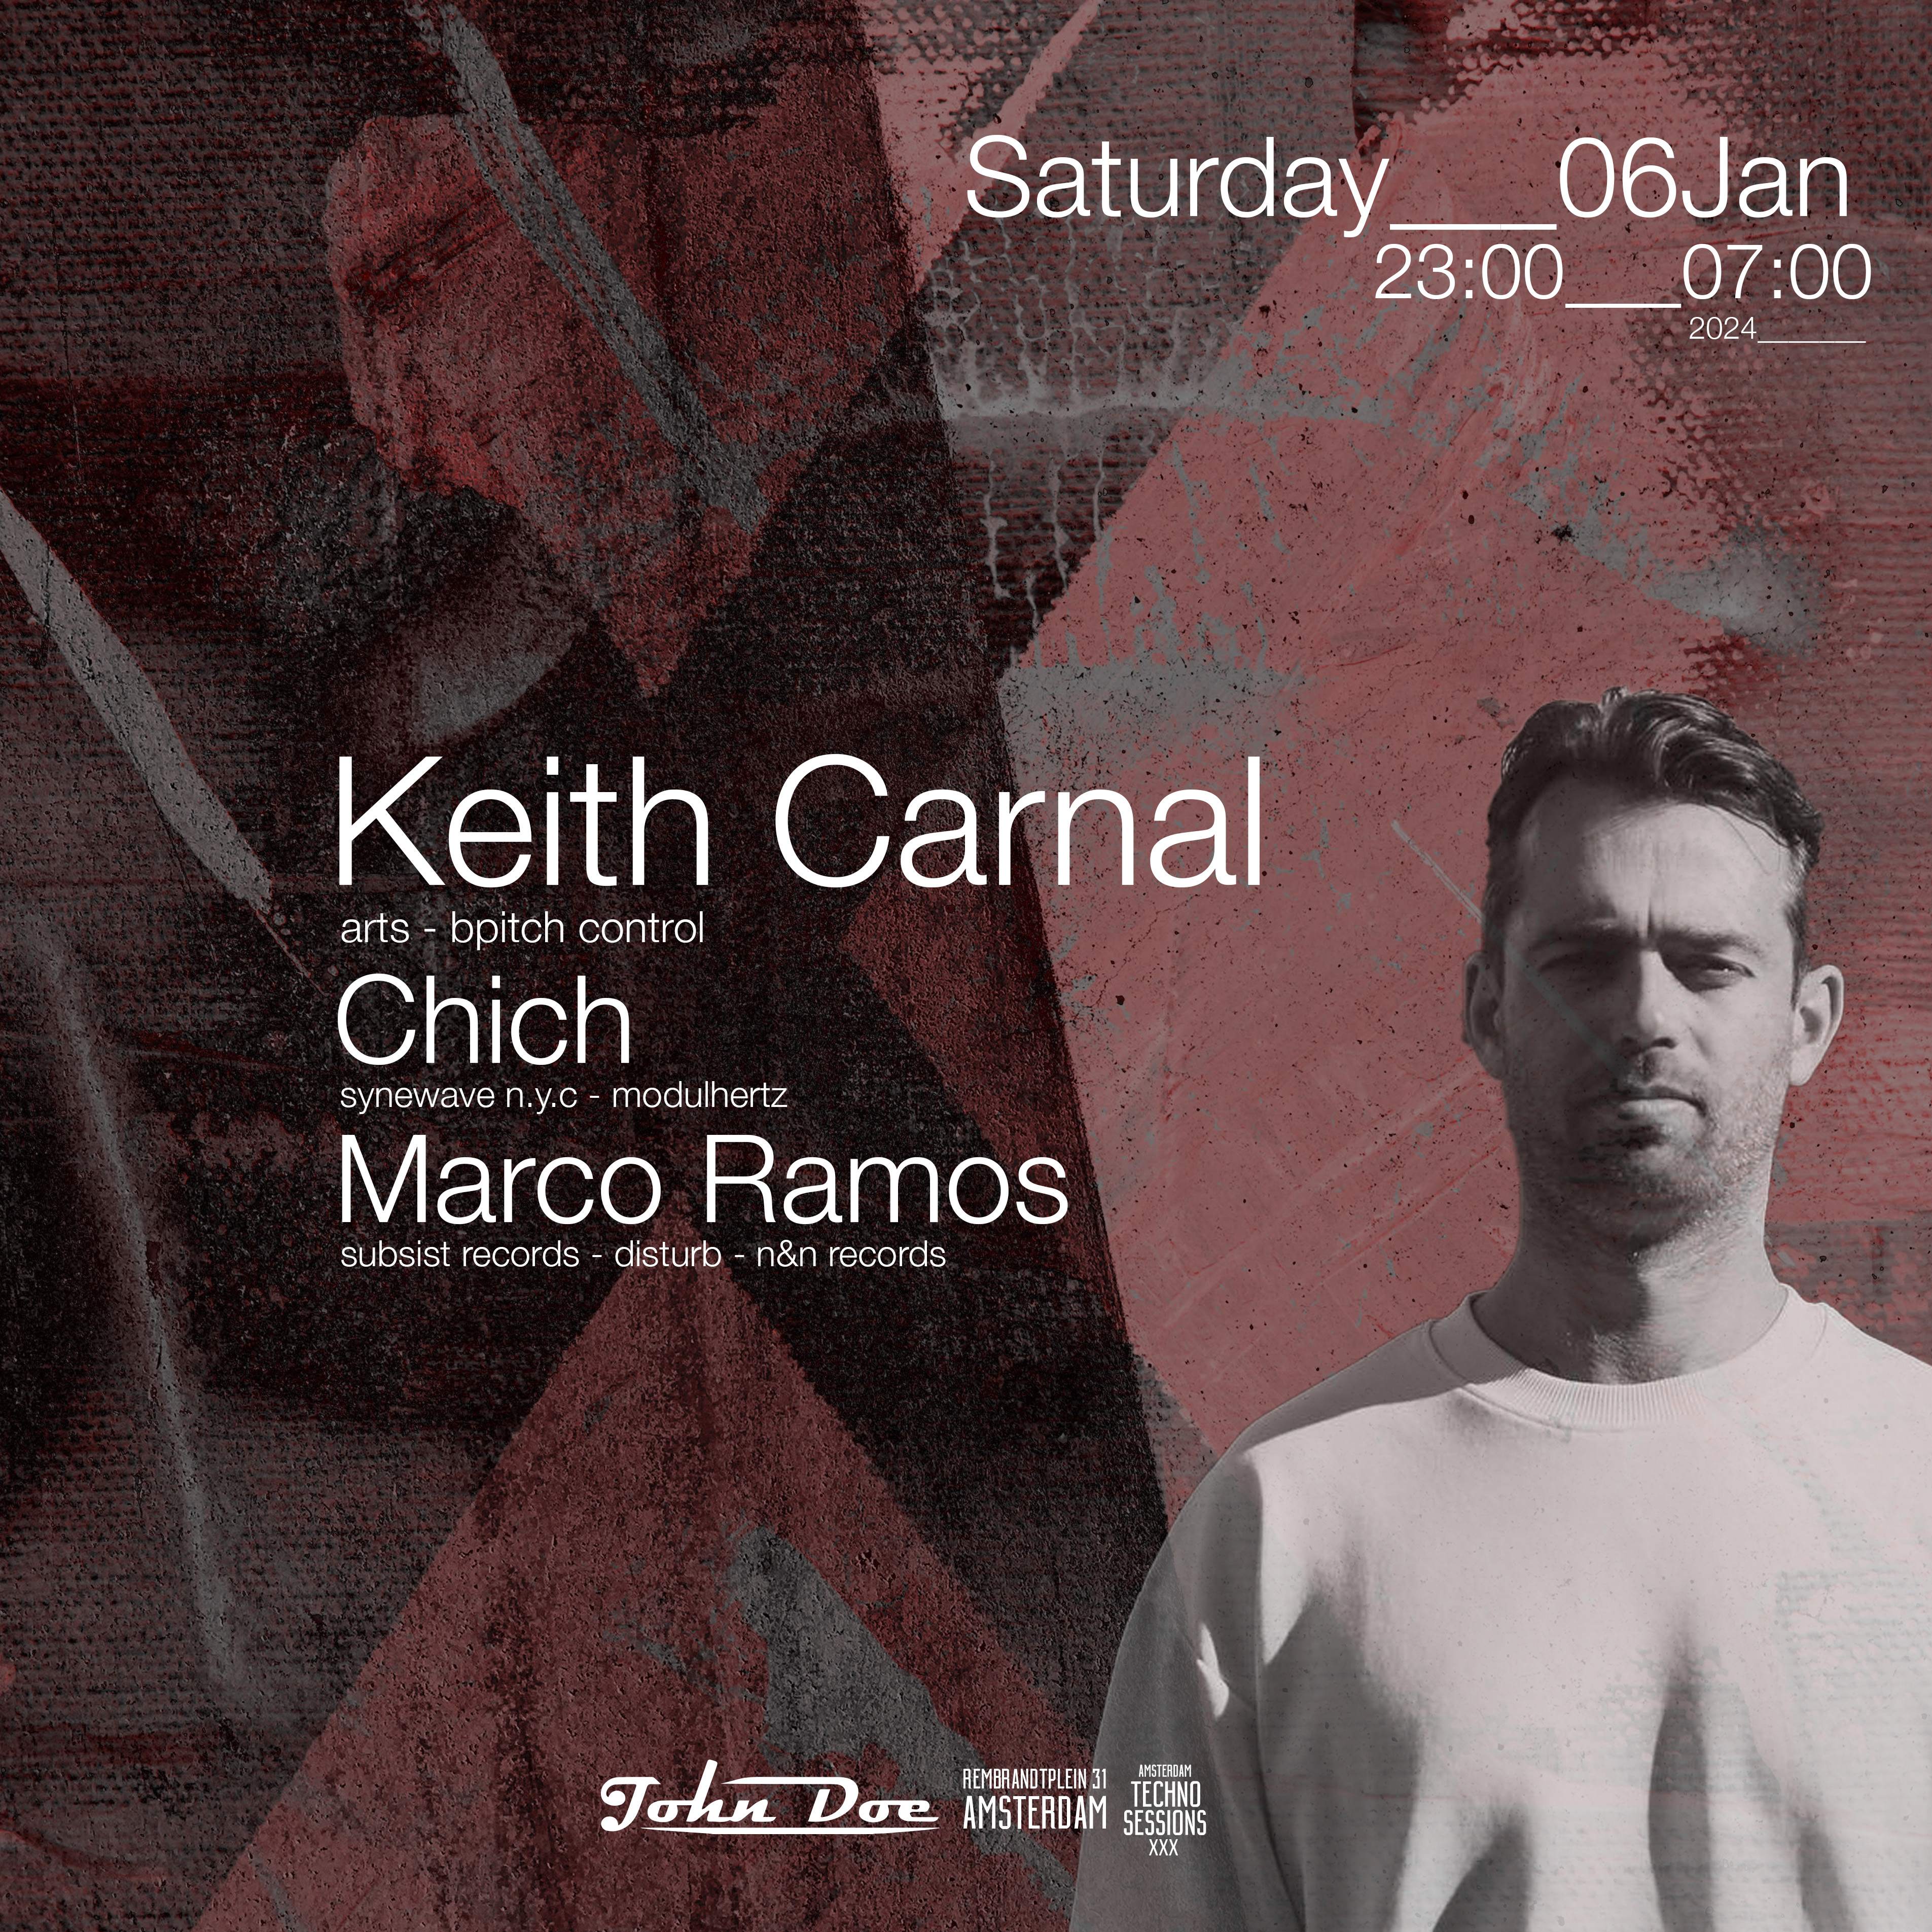 Amsterdam Techno Sessions w/ Keith Carnal (ARTS - Bpitch control) - フライヤー表